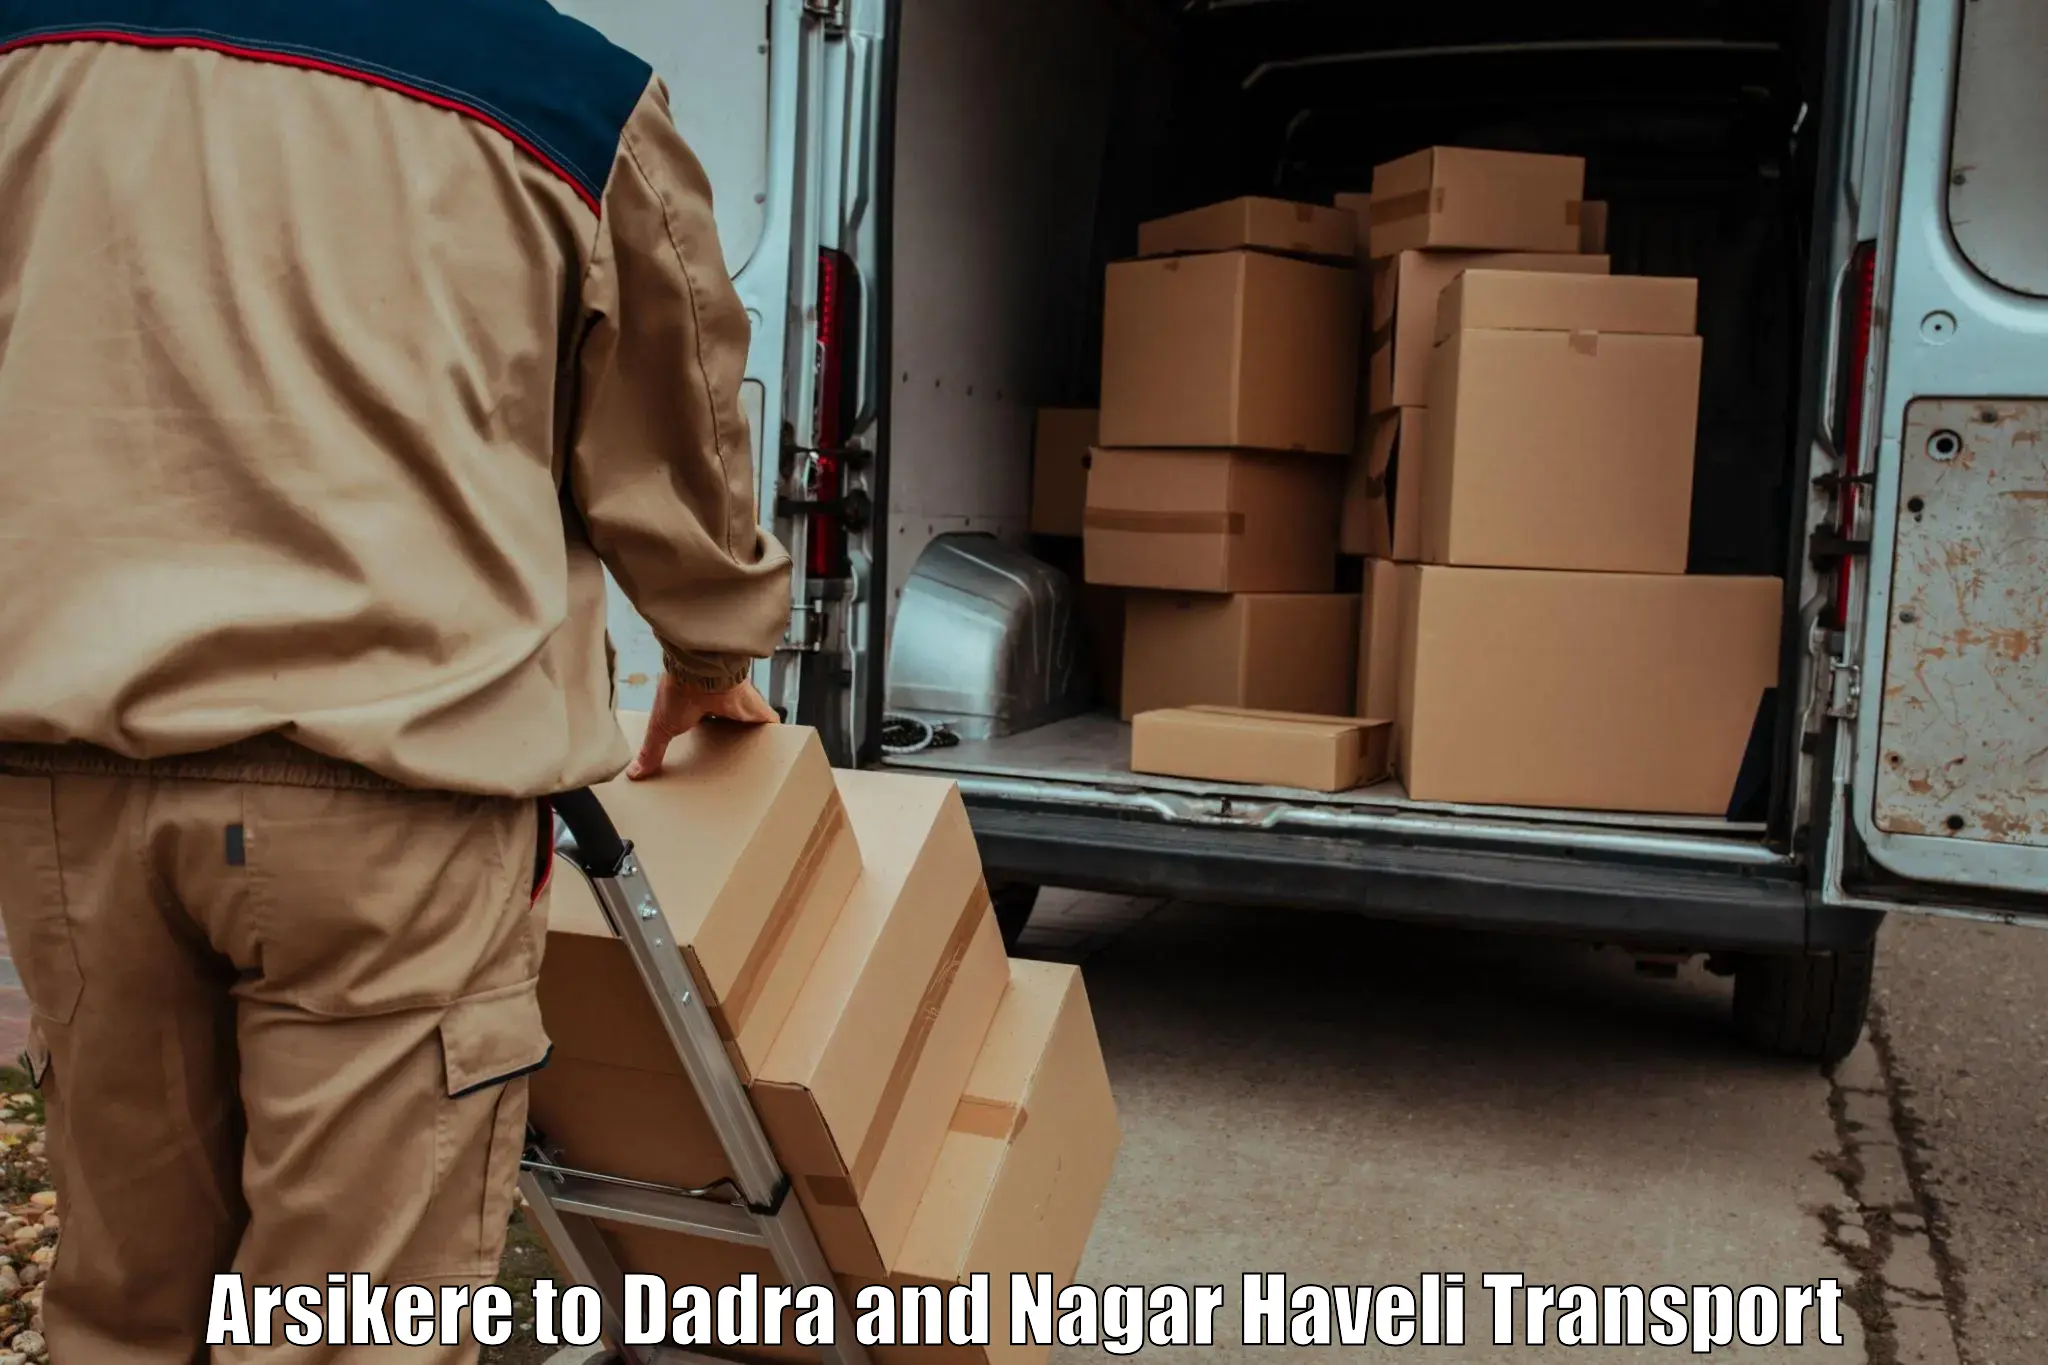 Air cargo transport services in Arsikere to Dadra and Nagar Haveli